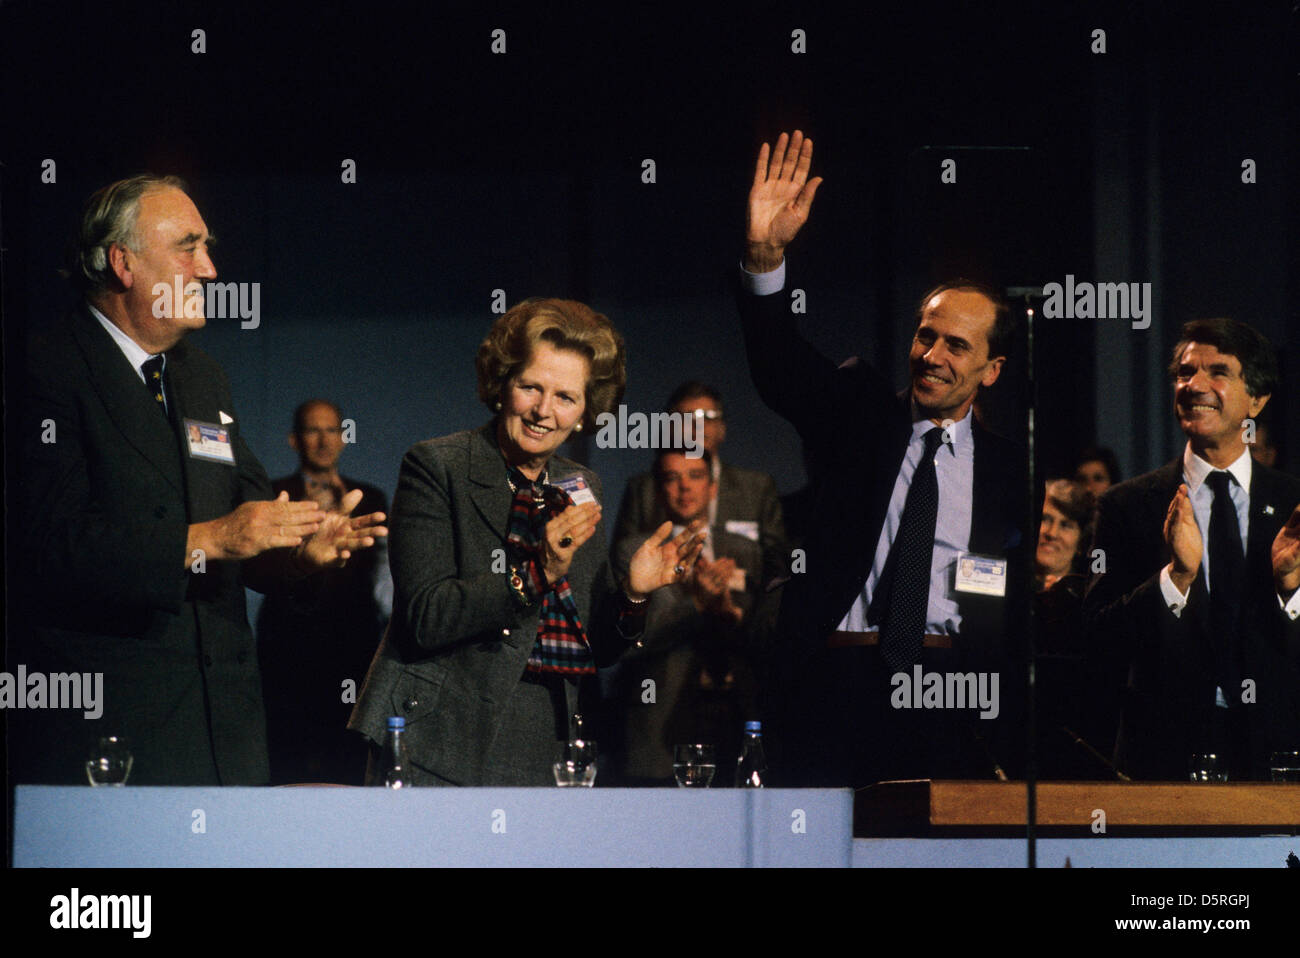 Prime Minister Margaret Thatcher at Conservative Party Conference Blackpool, England, 1985 with on left Willie Whitelaw and waving Norman Tebbit. Credit: Brian Harris Stock Photo